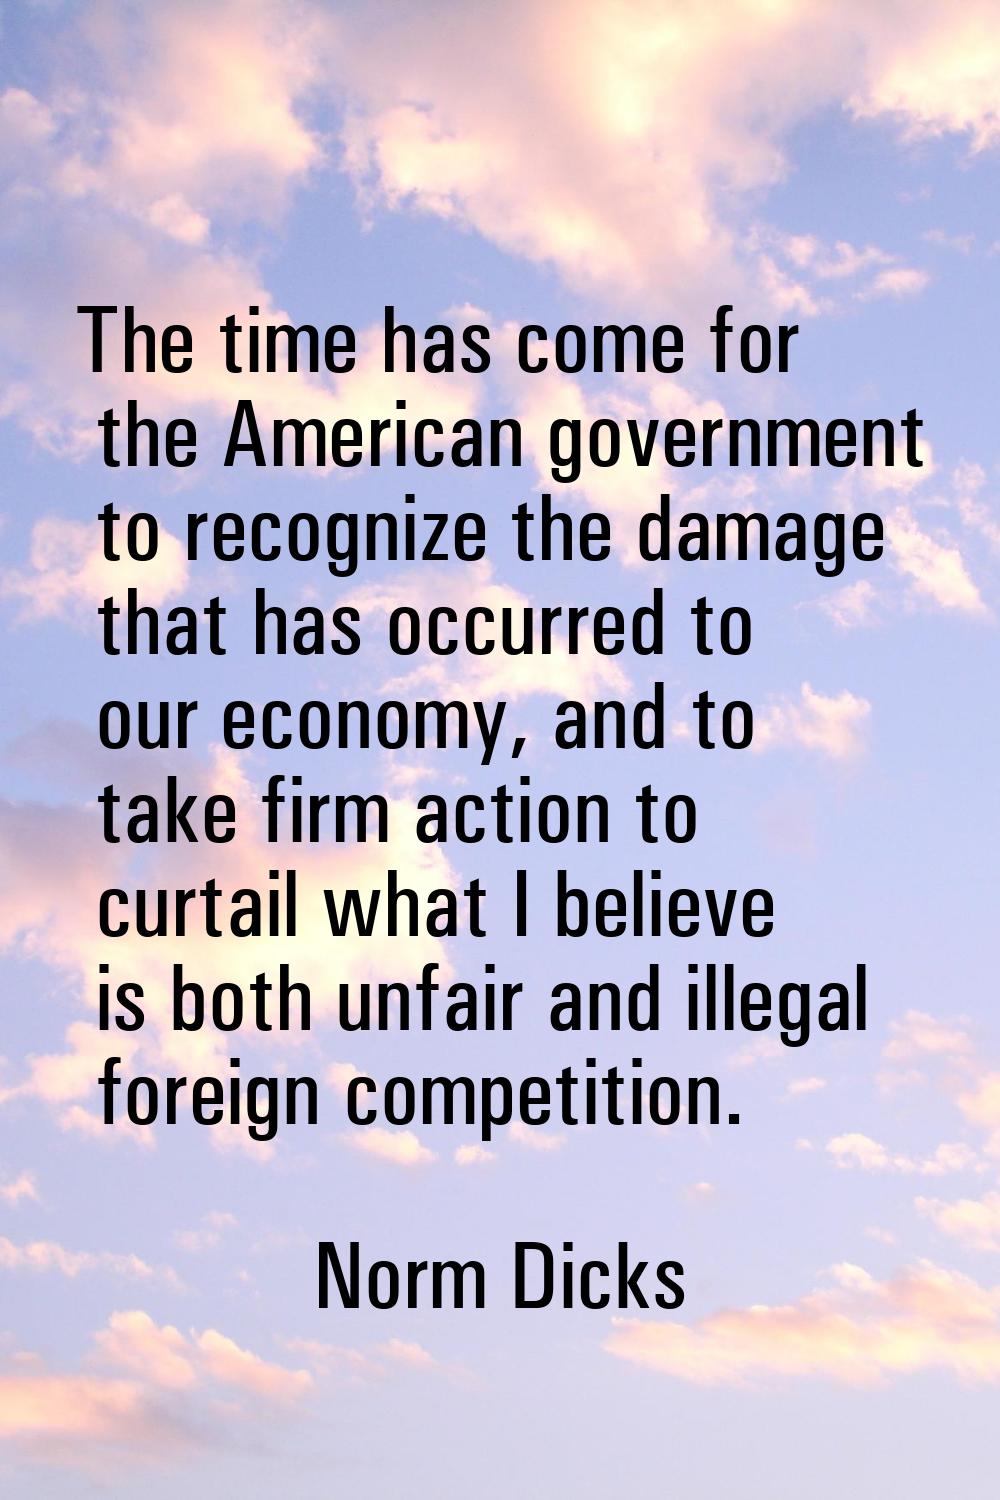 The time has come for the American government to recognize the damage that has occurred to our econ